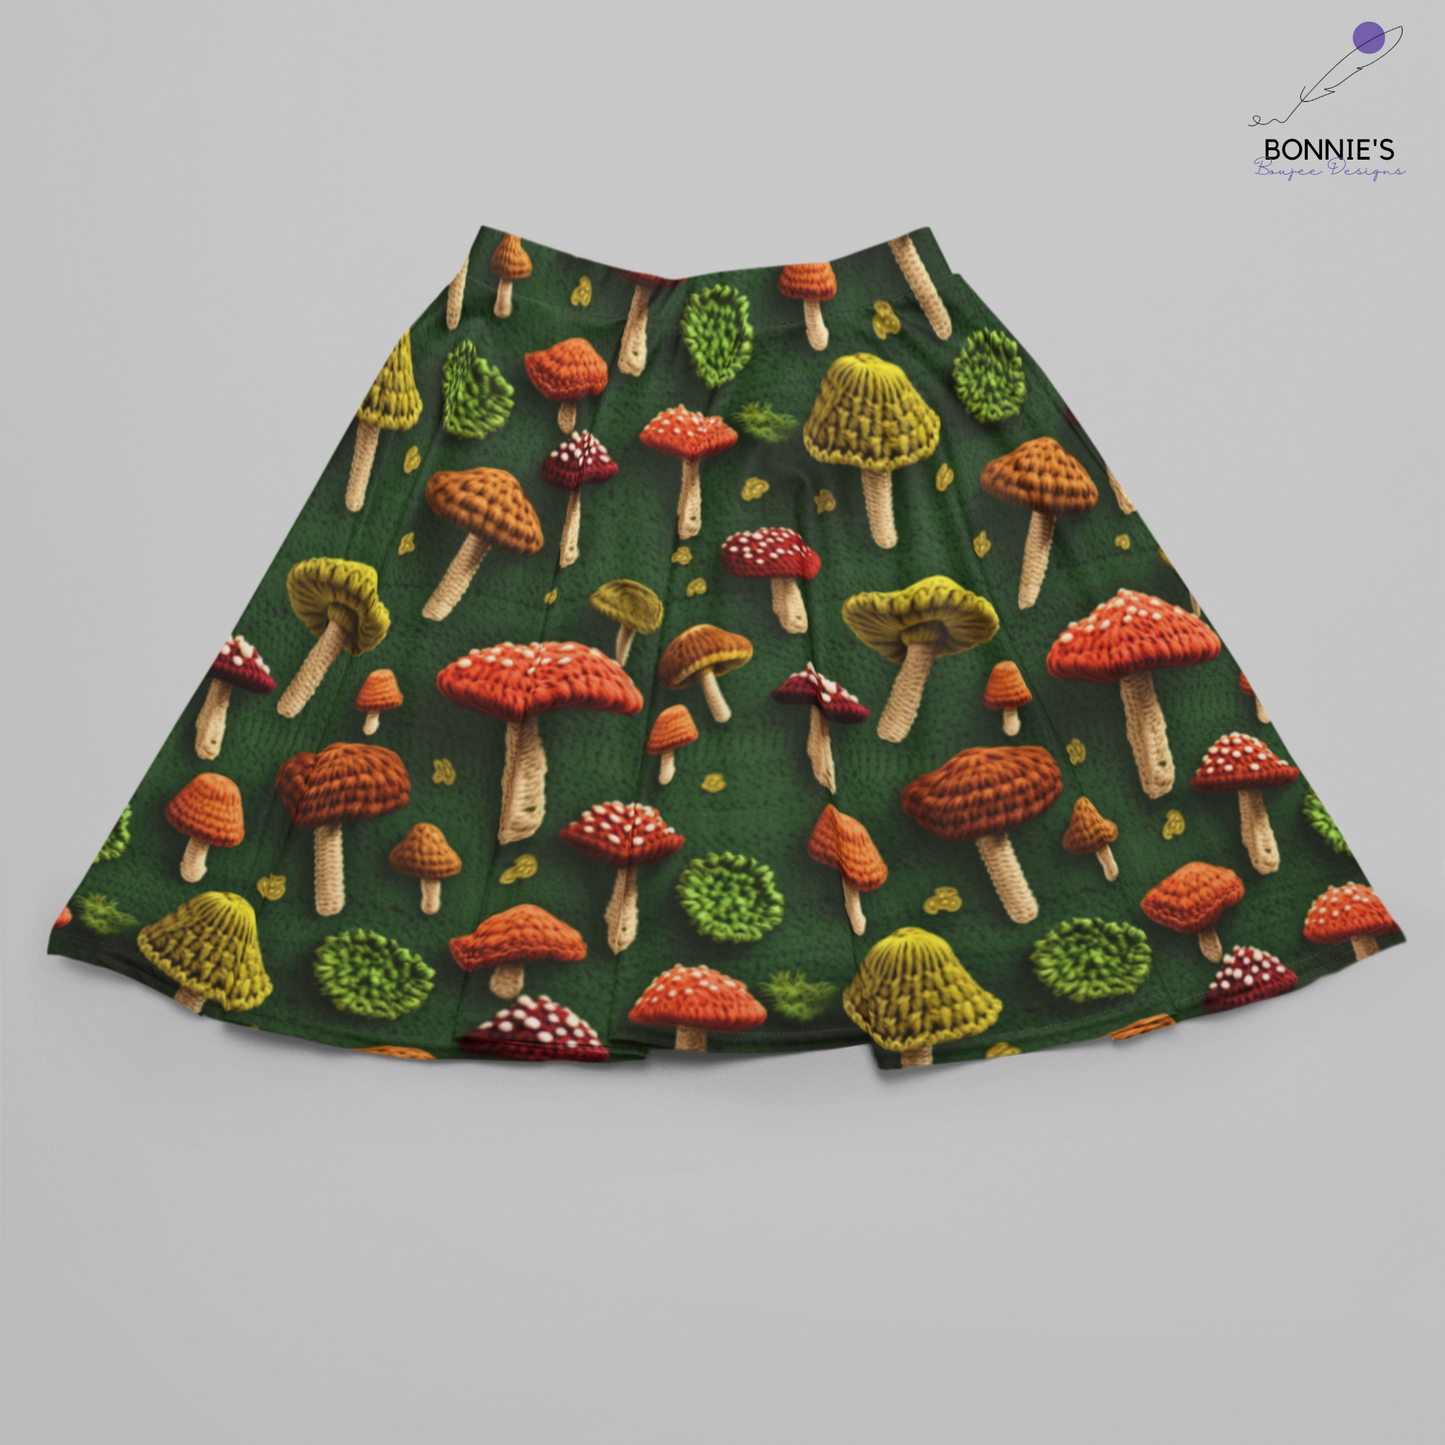 Crochet of Mushrooms on a Green Background Seamless File